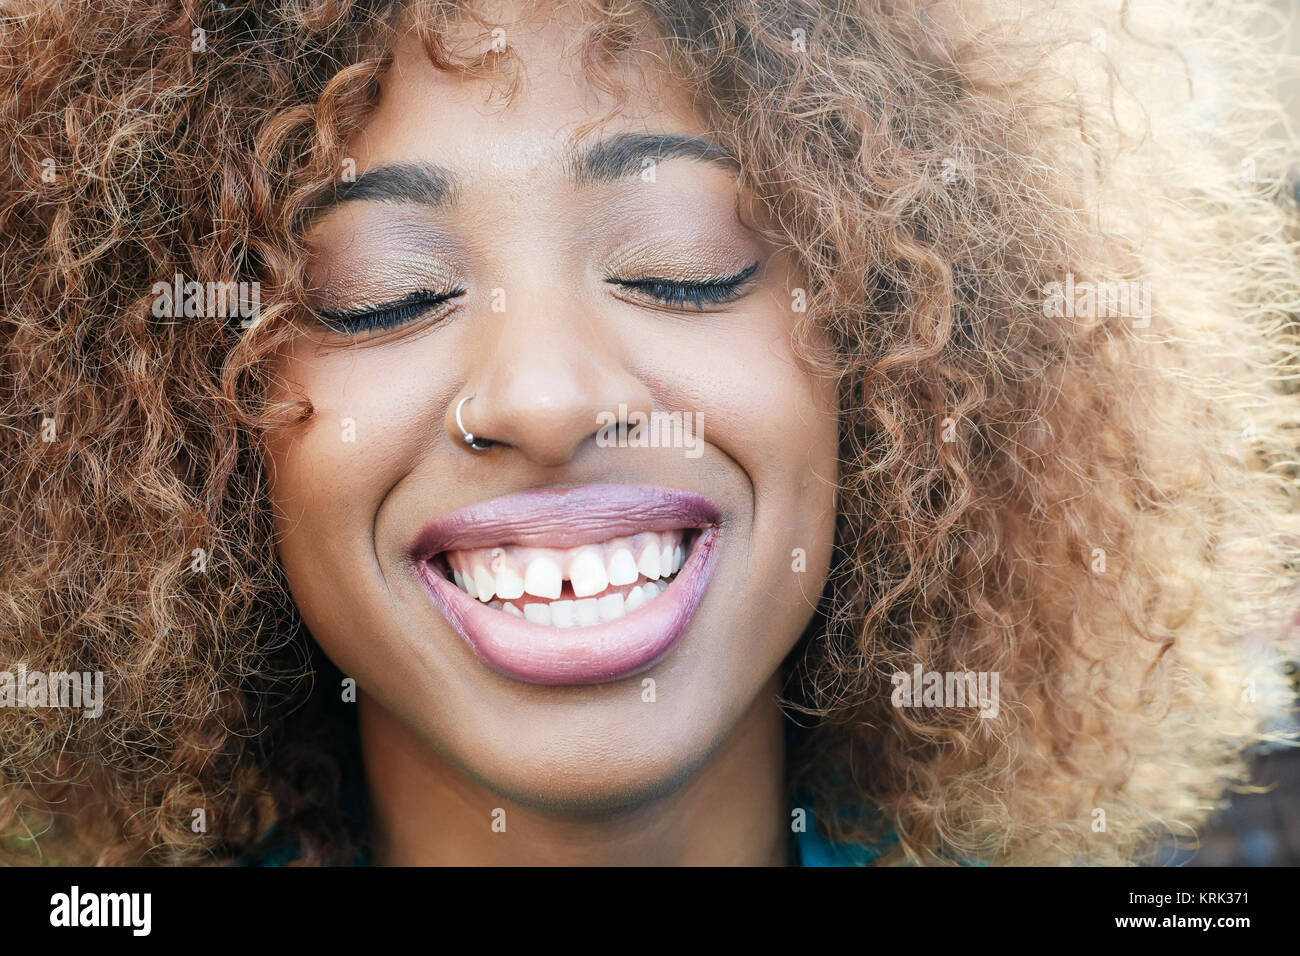 Close up of smiling black woman with eyes closed Banque D'Images